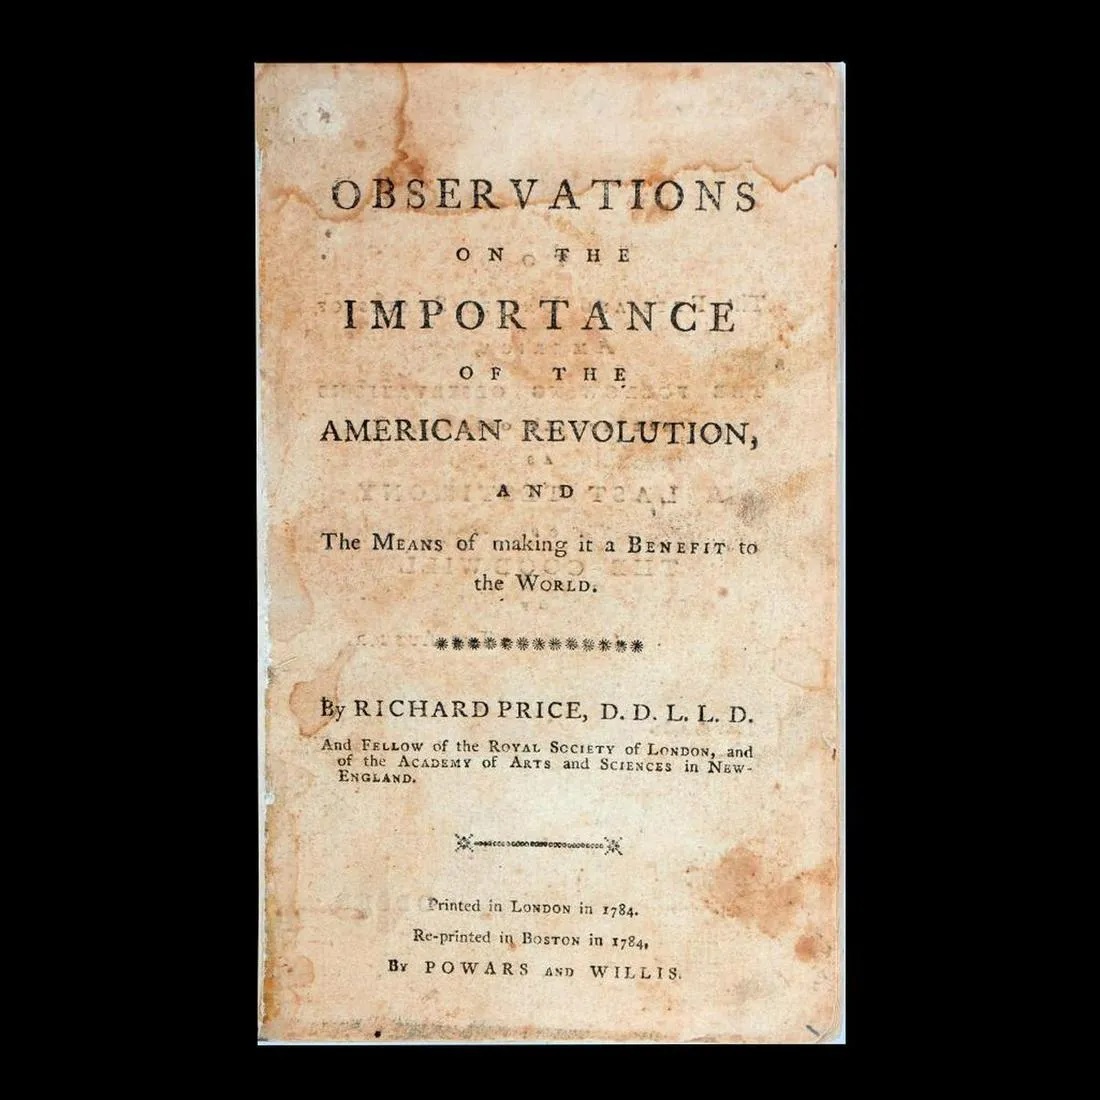 Richard Price’s 1784 booklet ‘Observations on the Importance of the American Revolution …’ est. $800-$1,200